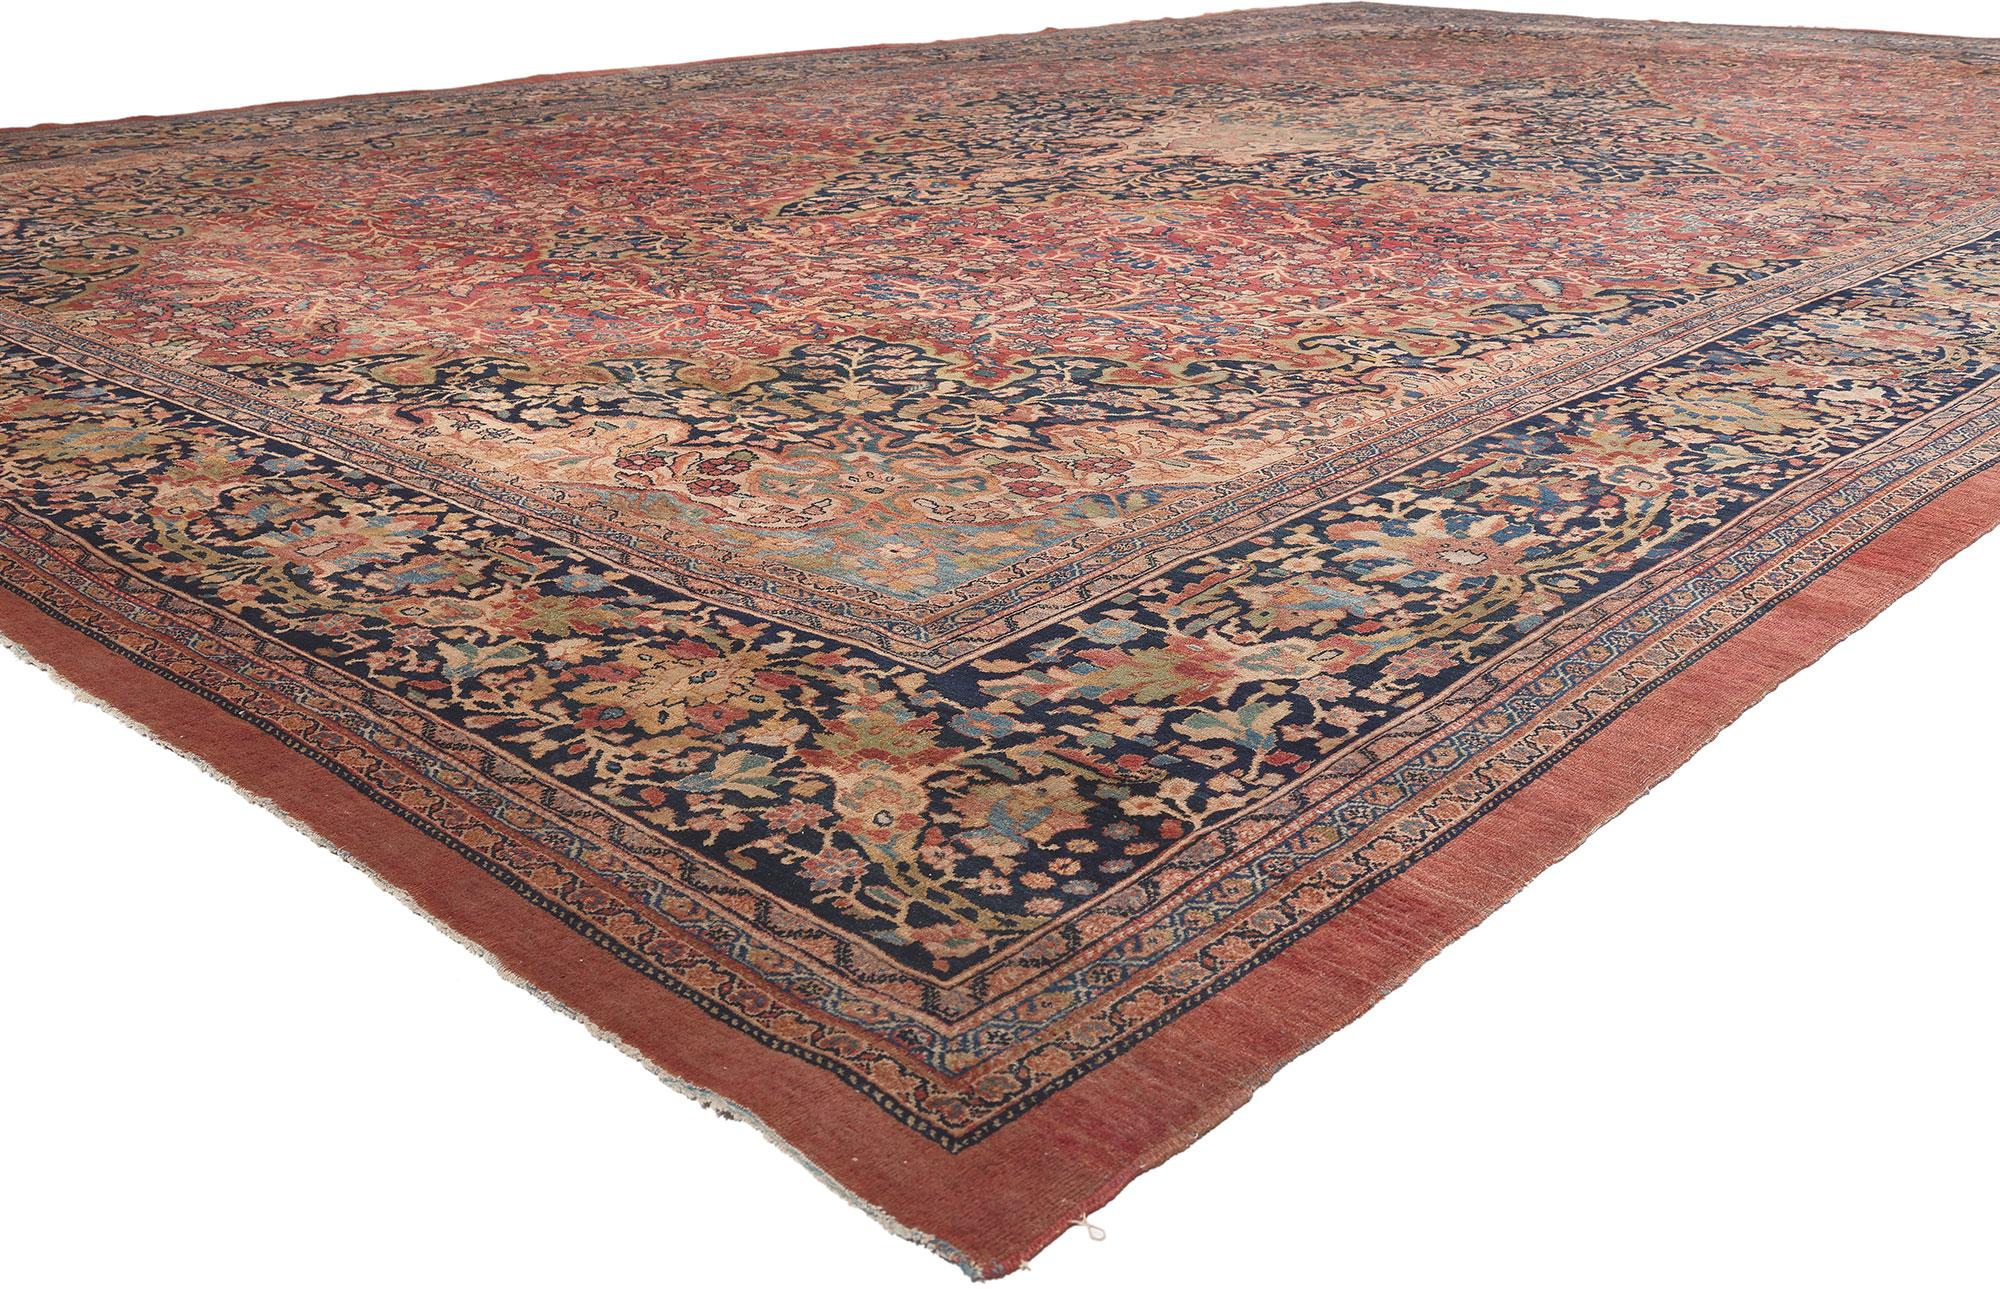 78651 Oversized Antique Persian Farahan Rug, 13'10 x 21'07.
​Representing a high-end category of Persian carpets and a sign of wealth, this palatial antique Persian Farahan rug is a captivating vision of woven beauty. The elaborate details and